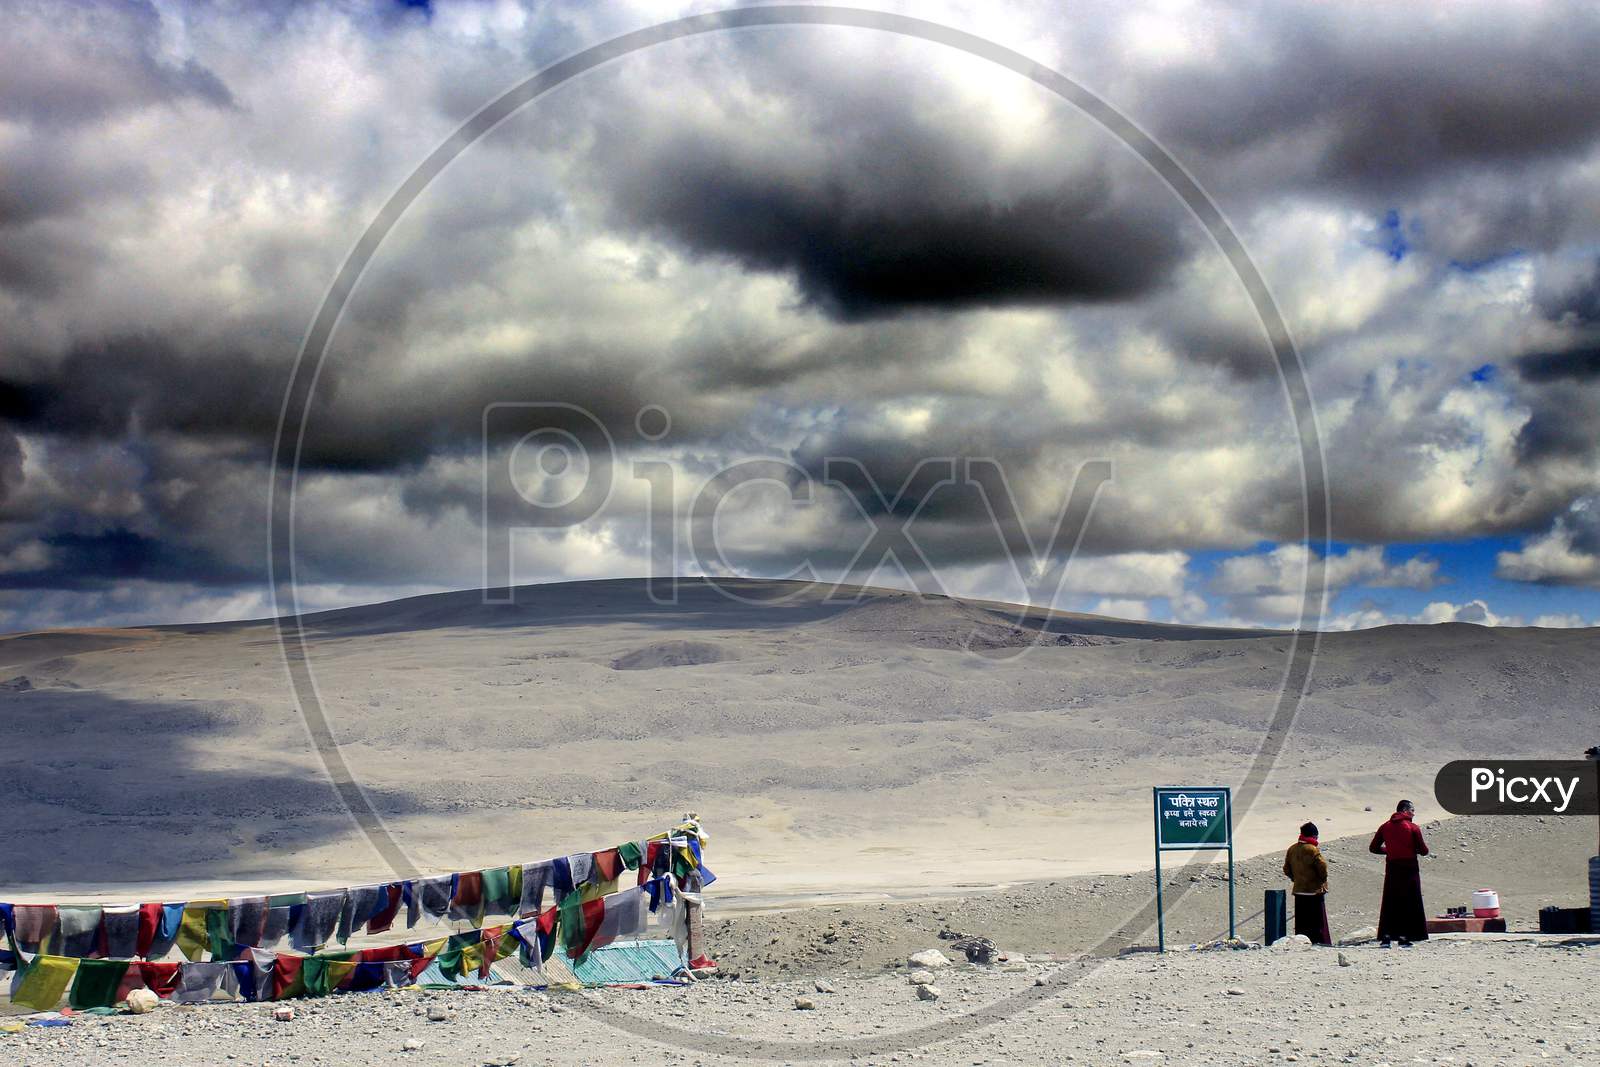 Mountains of Sikkim with Huge Clouds and People in the foreground